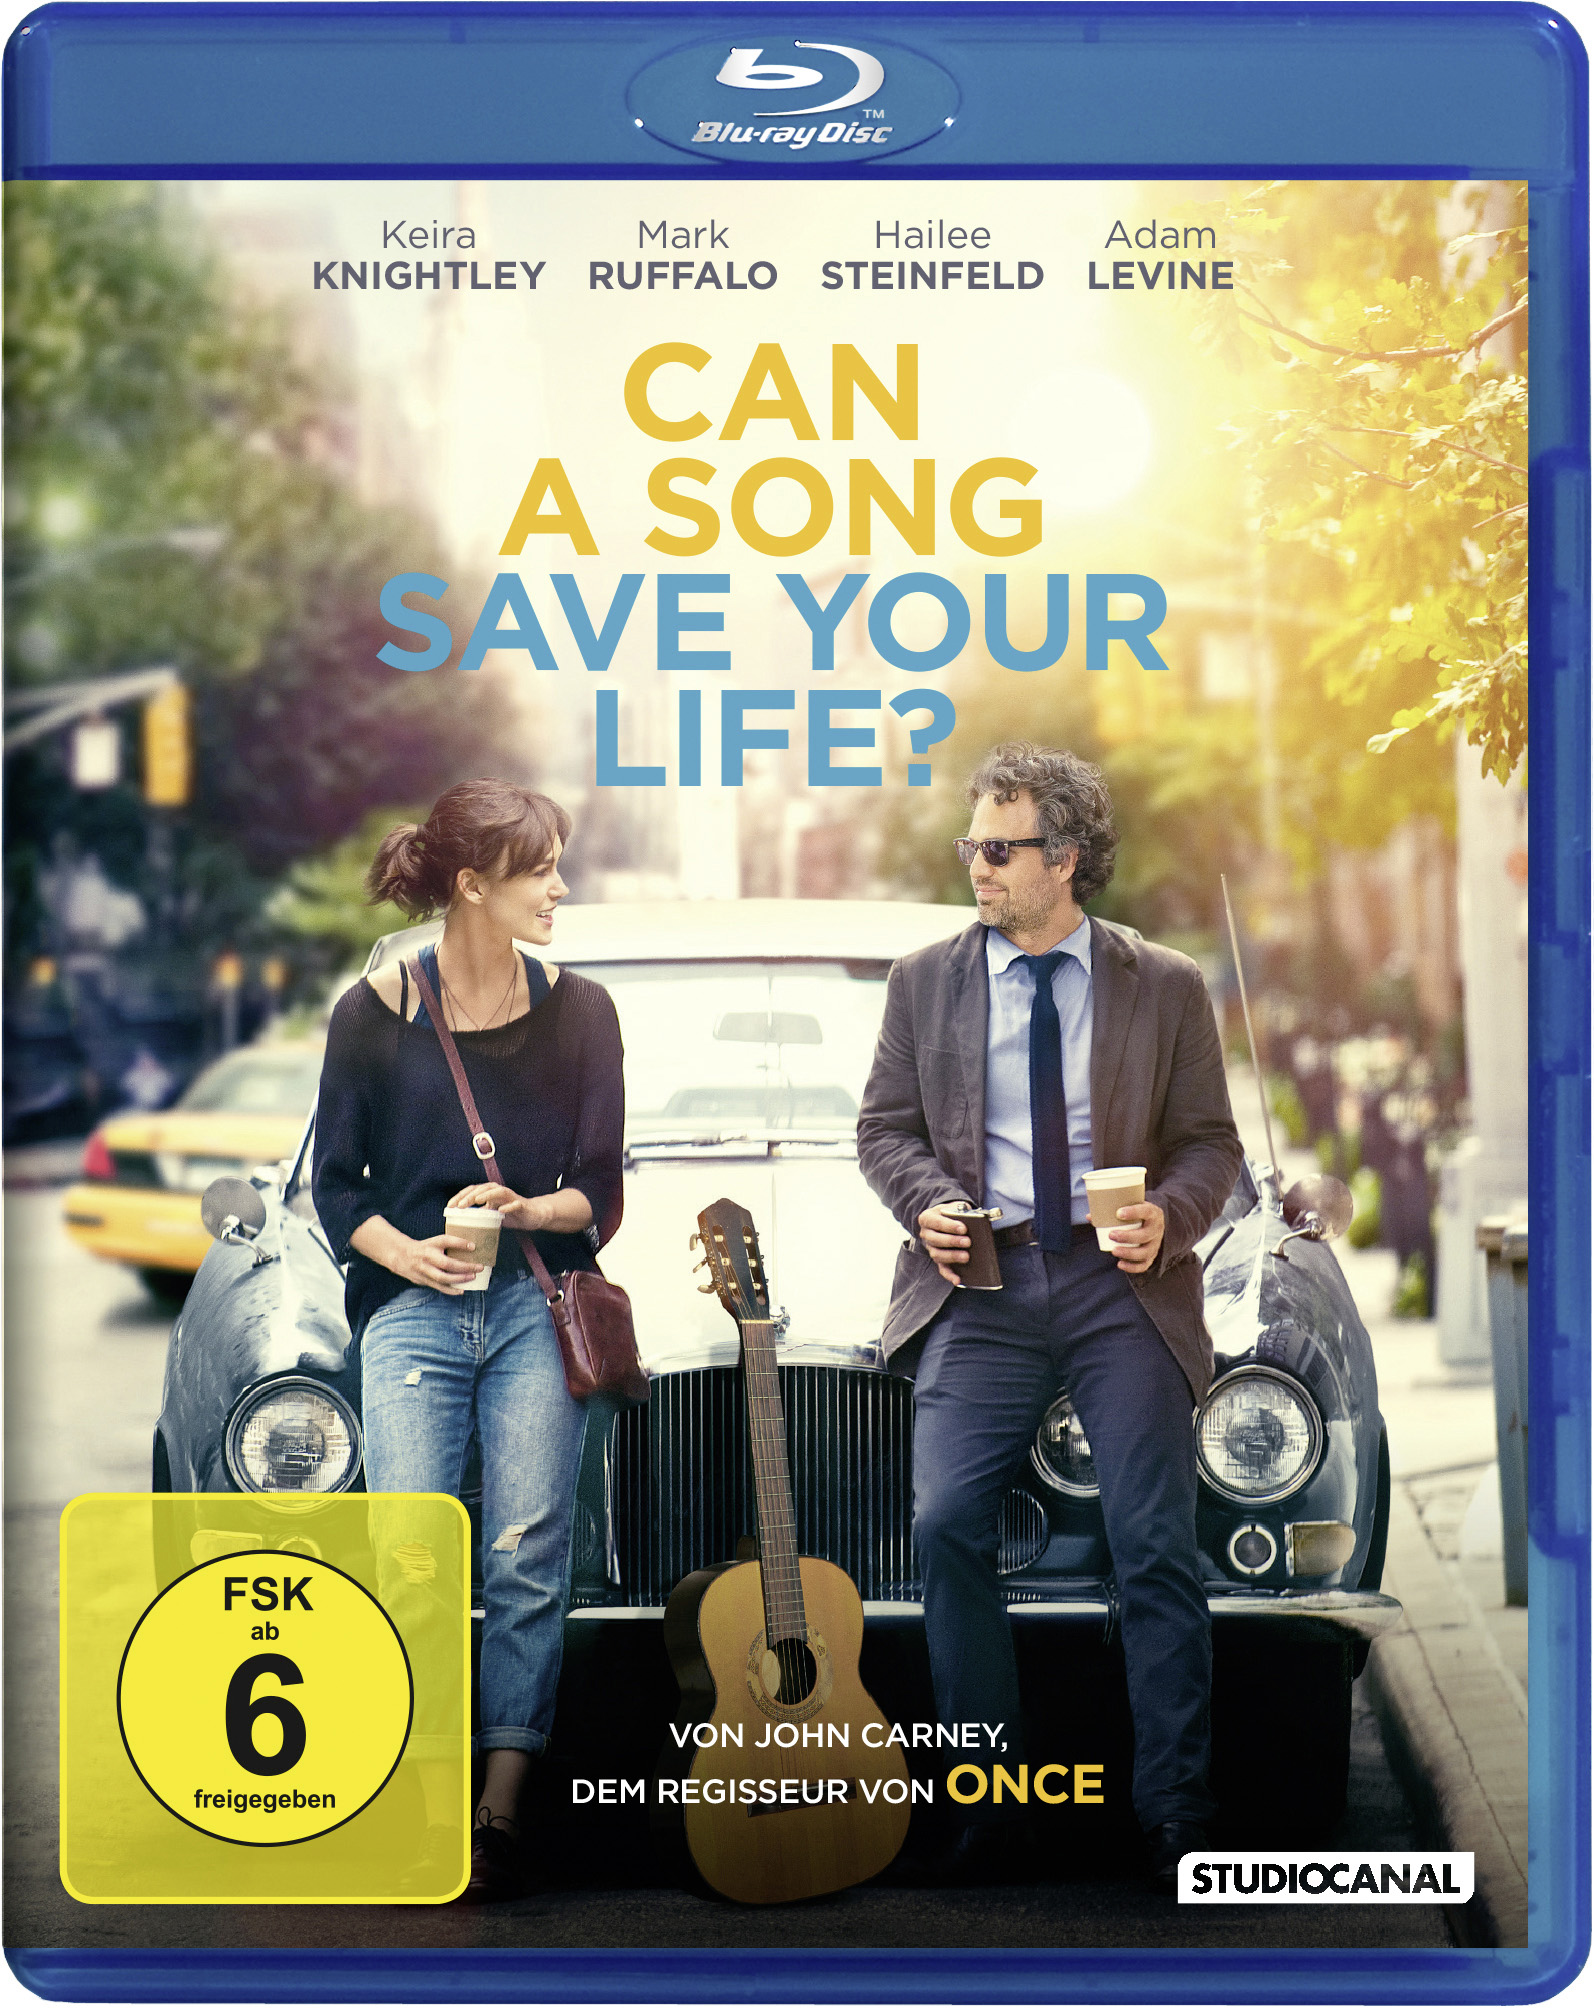 A Song Save Life? Blu-ray Can Your